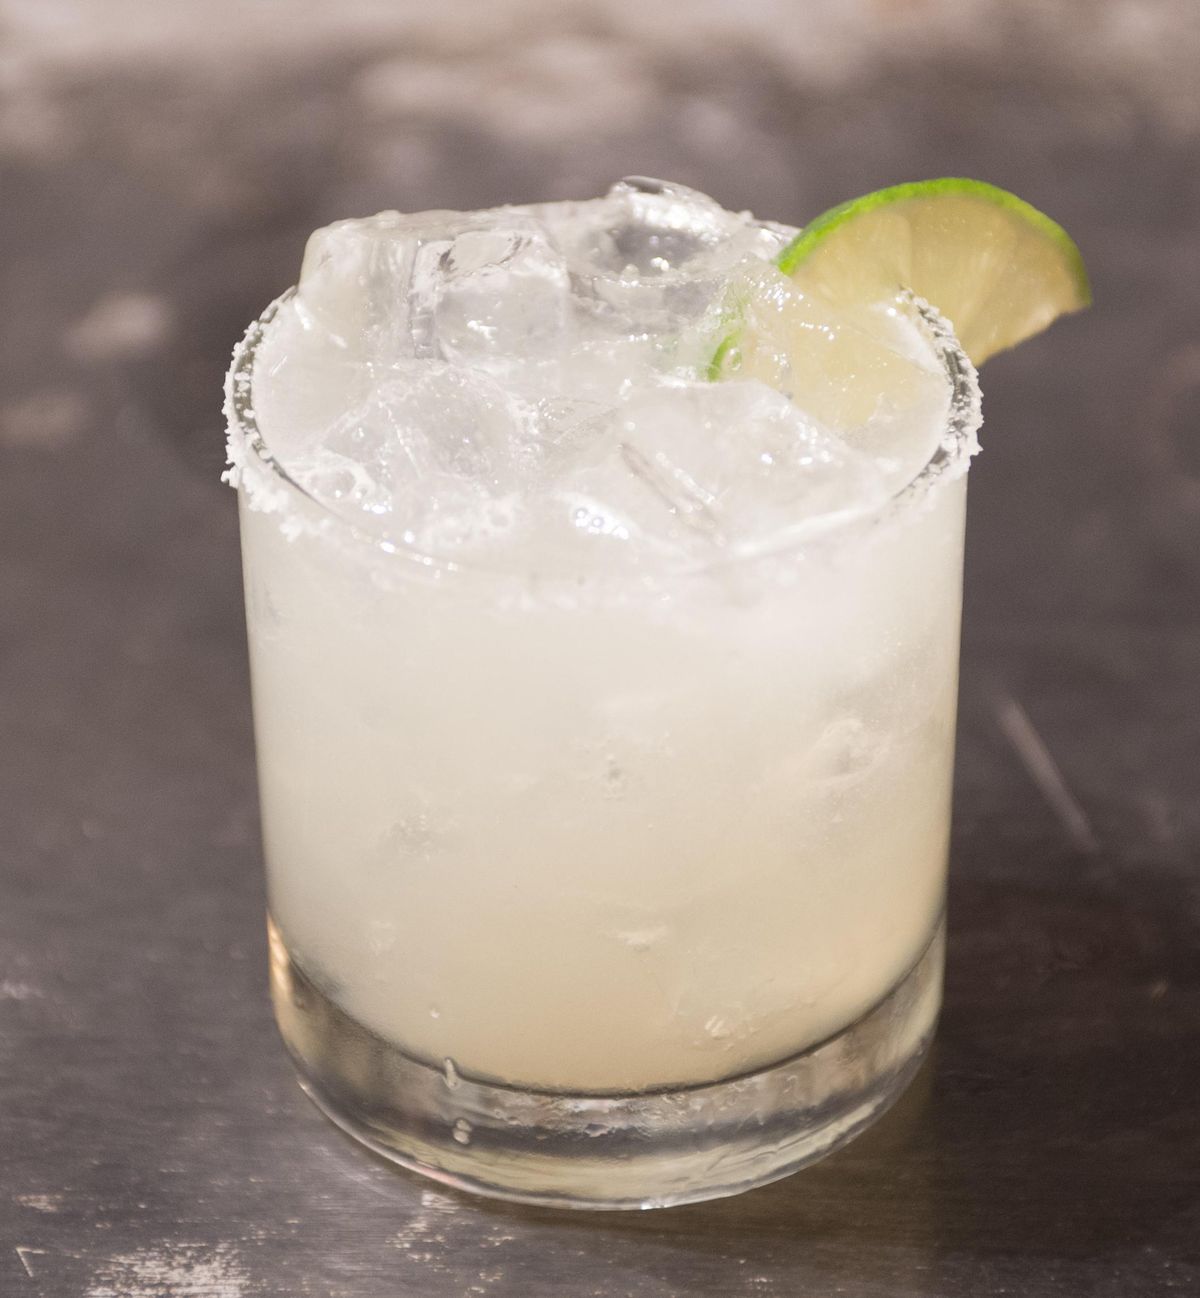 The Classic Margarita as made by Ben Poffenroth of Durkin’s Liquor Bar. (Jesse Tinsley / The Spokesman-Review)